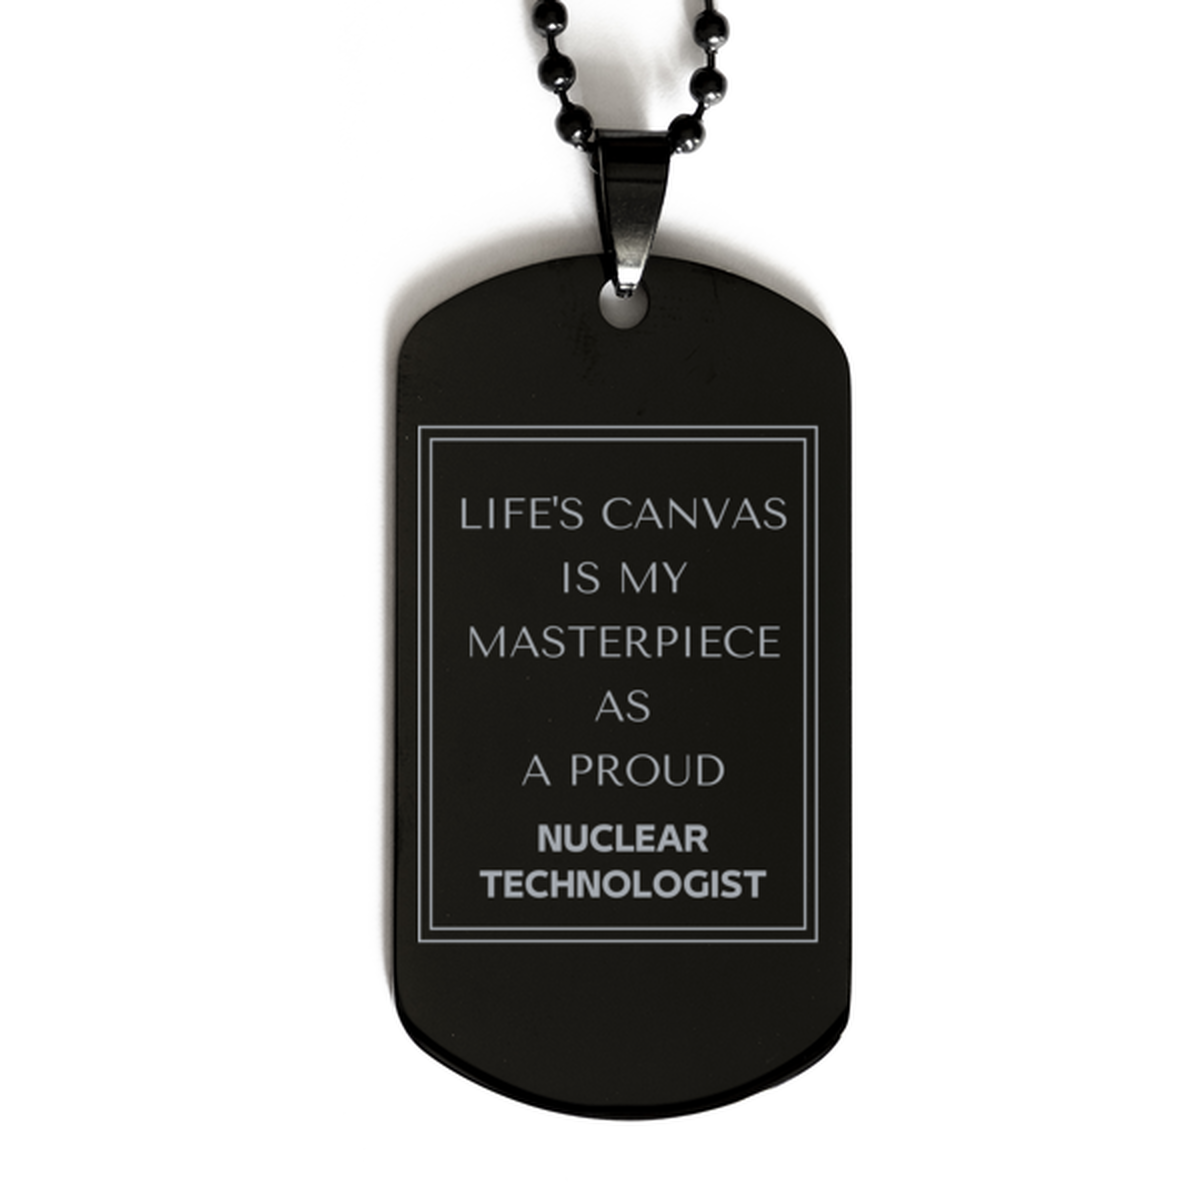 Proud Nuclear Technologist Gifts, Life's canvas is my masterpiece, Epic Birthday Christmas Unique Black Dog Tag For Nuclear Technologist, Coworkers, Men, Women, Friends